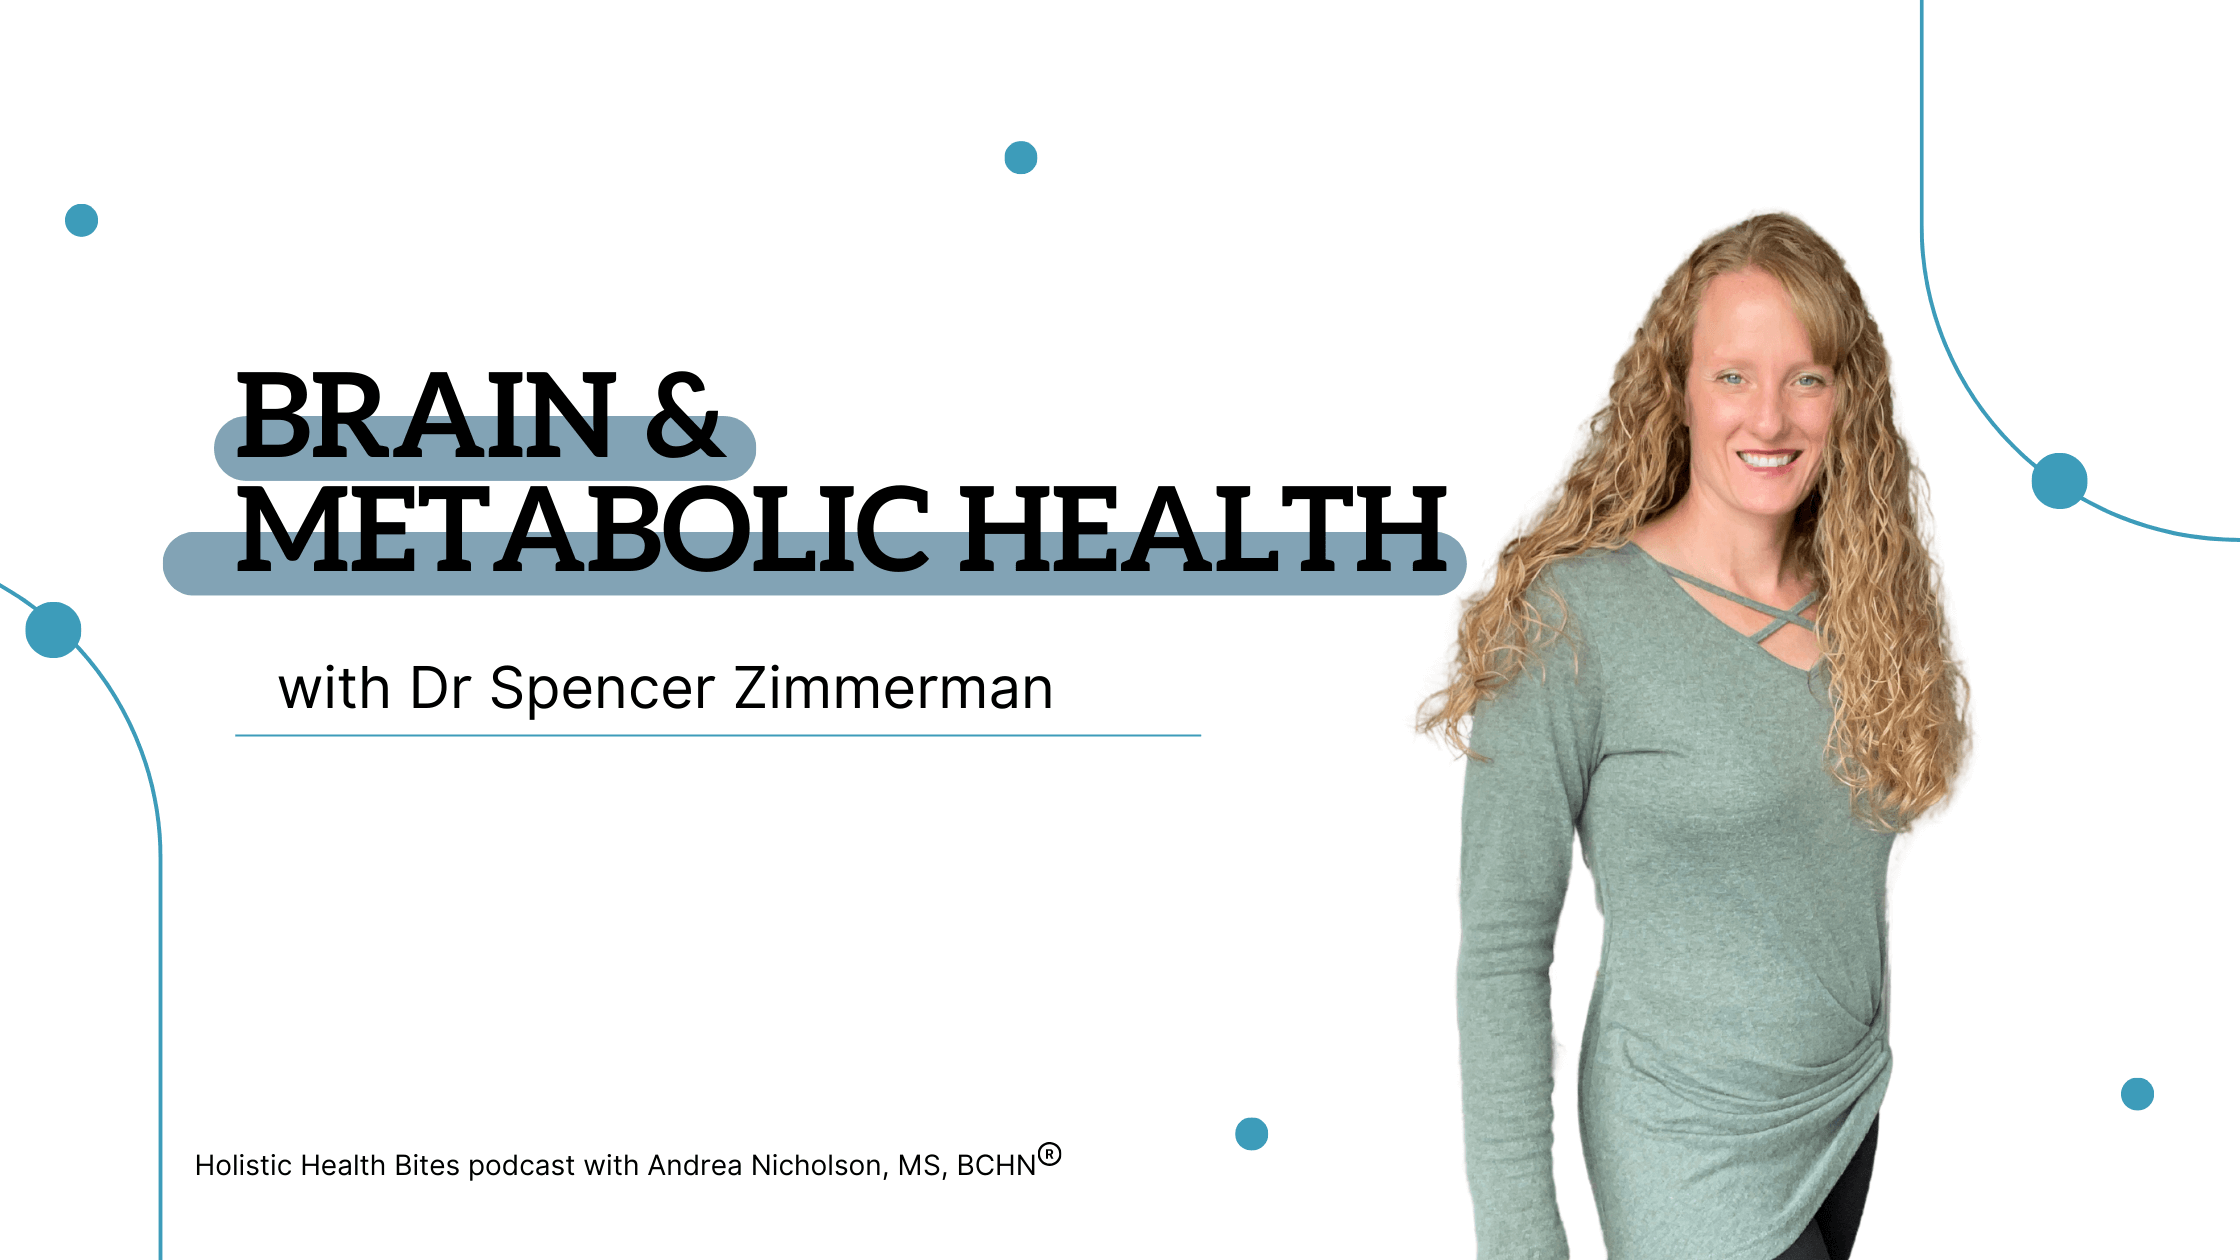 Brain and metabolic health; a Holistic Health Bites podcast episode by Functional Nutritionist Andrea Nicholson featuring Dr Spencer Zimmerman